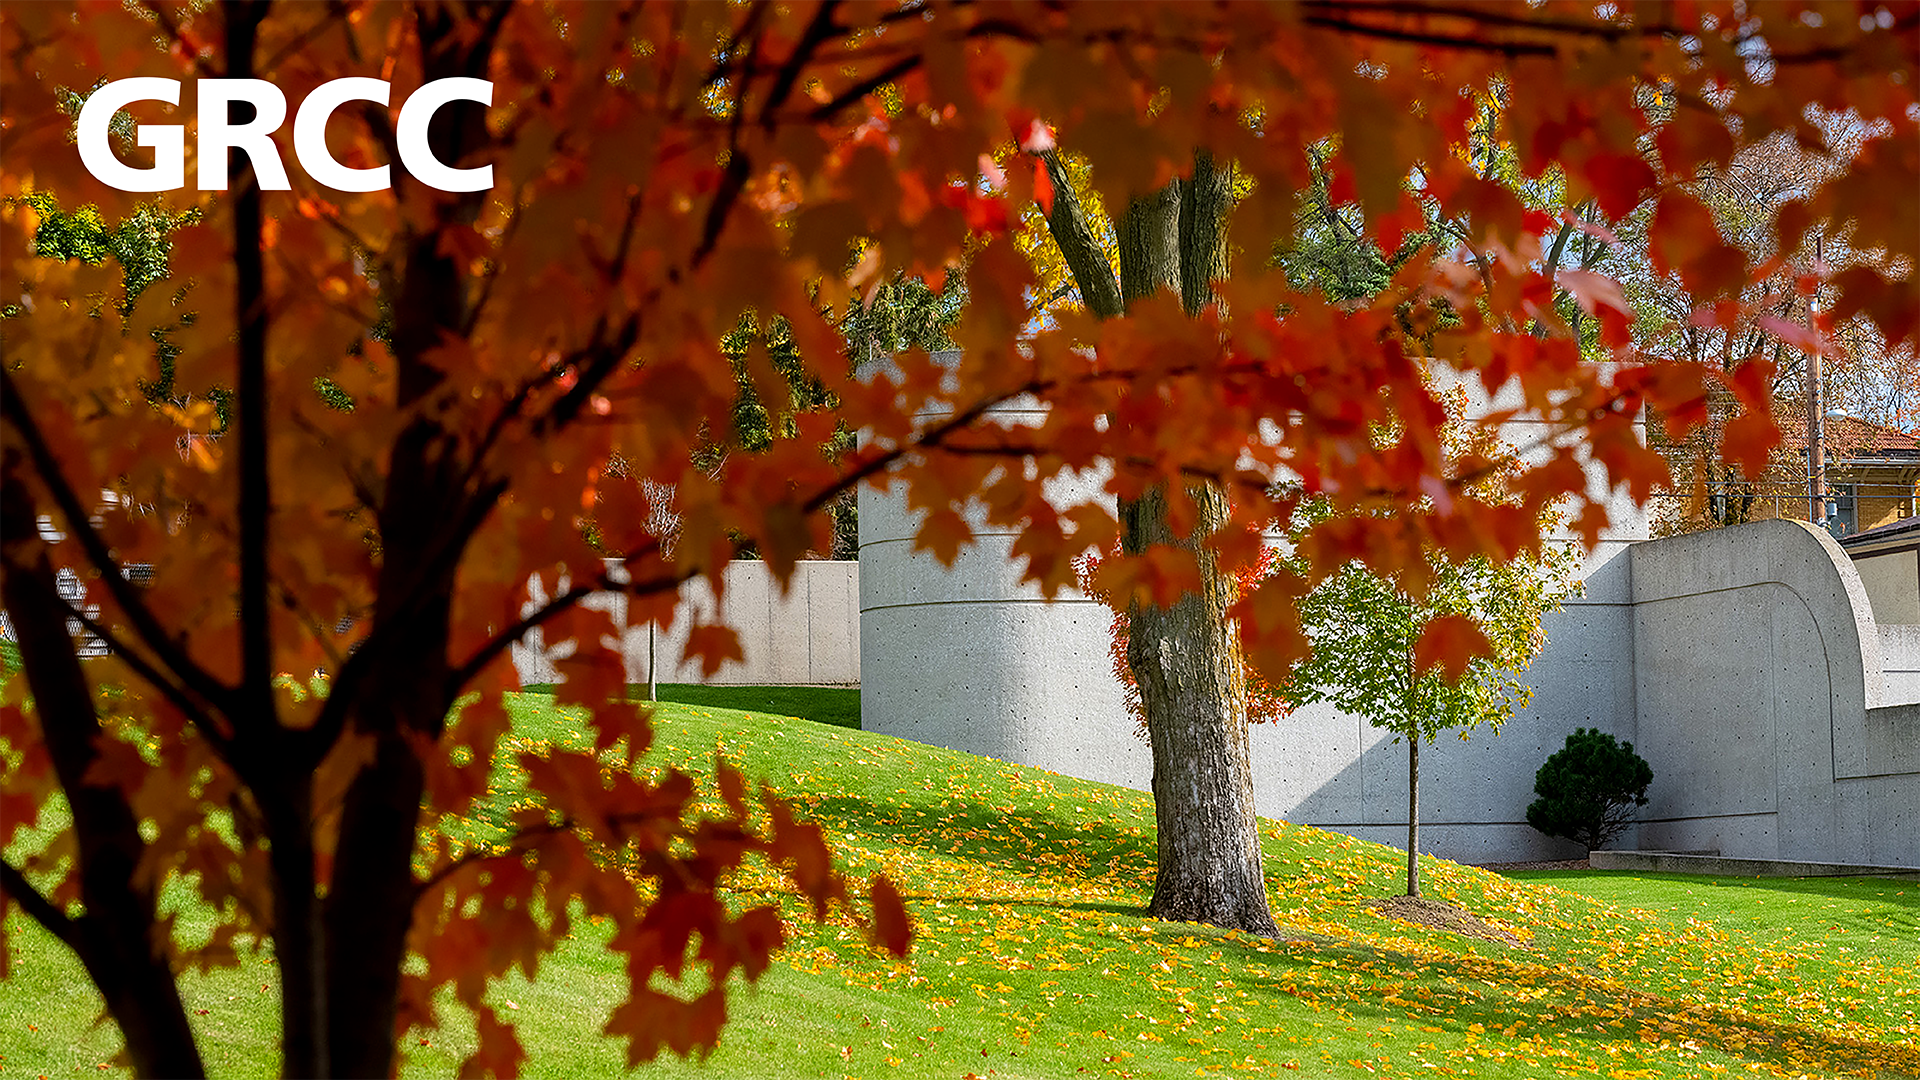 GRCC campus in the fall